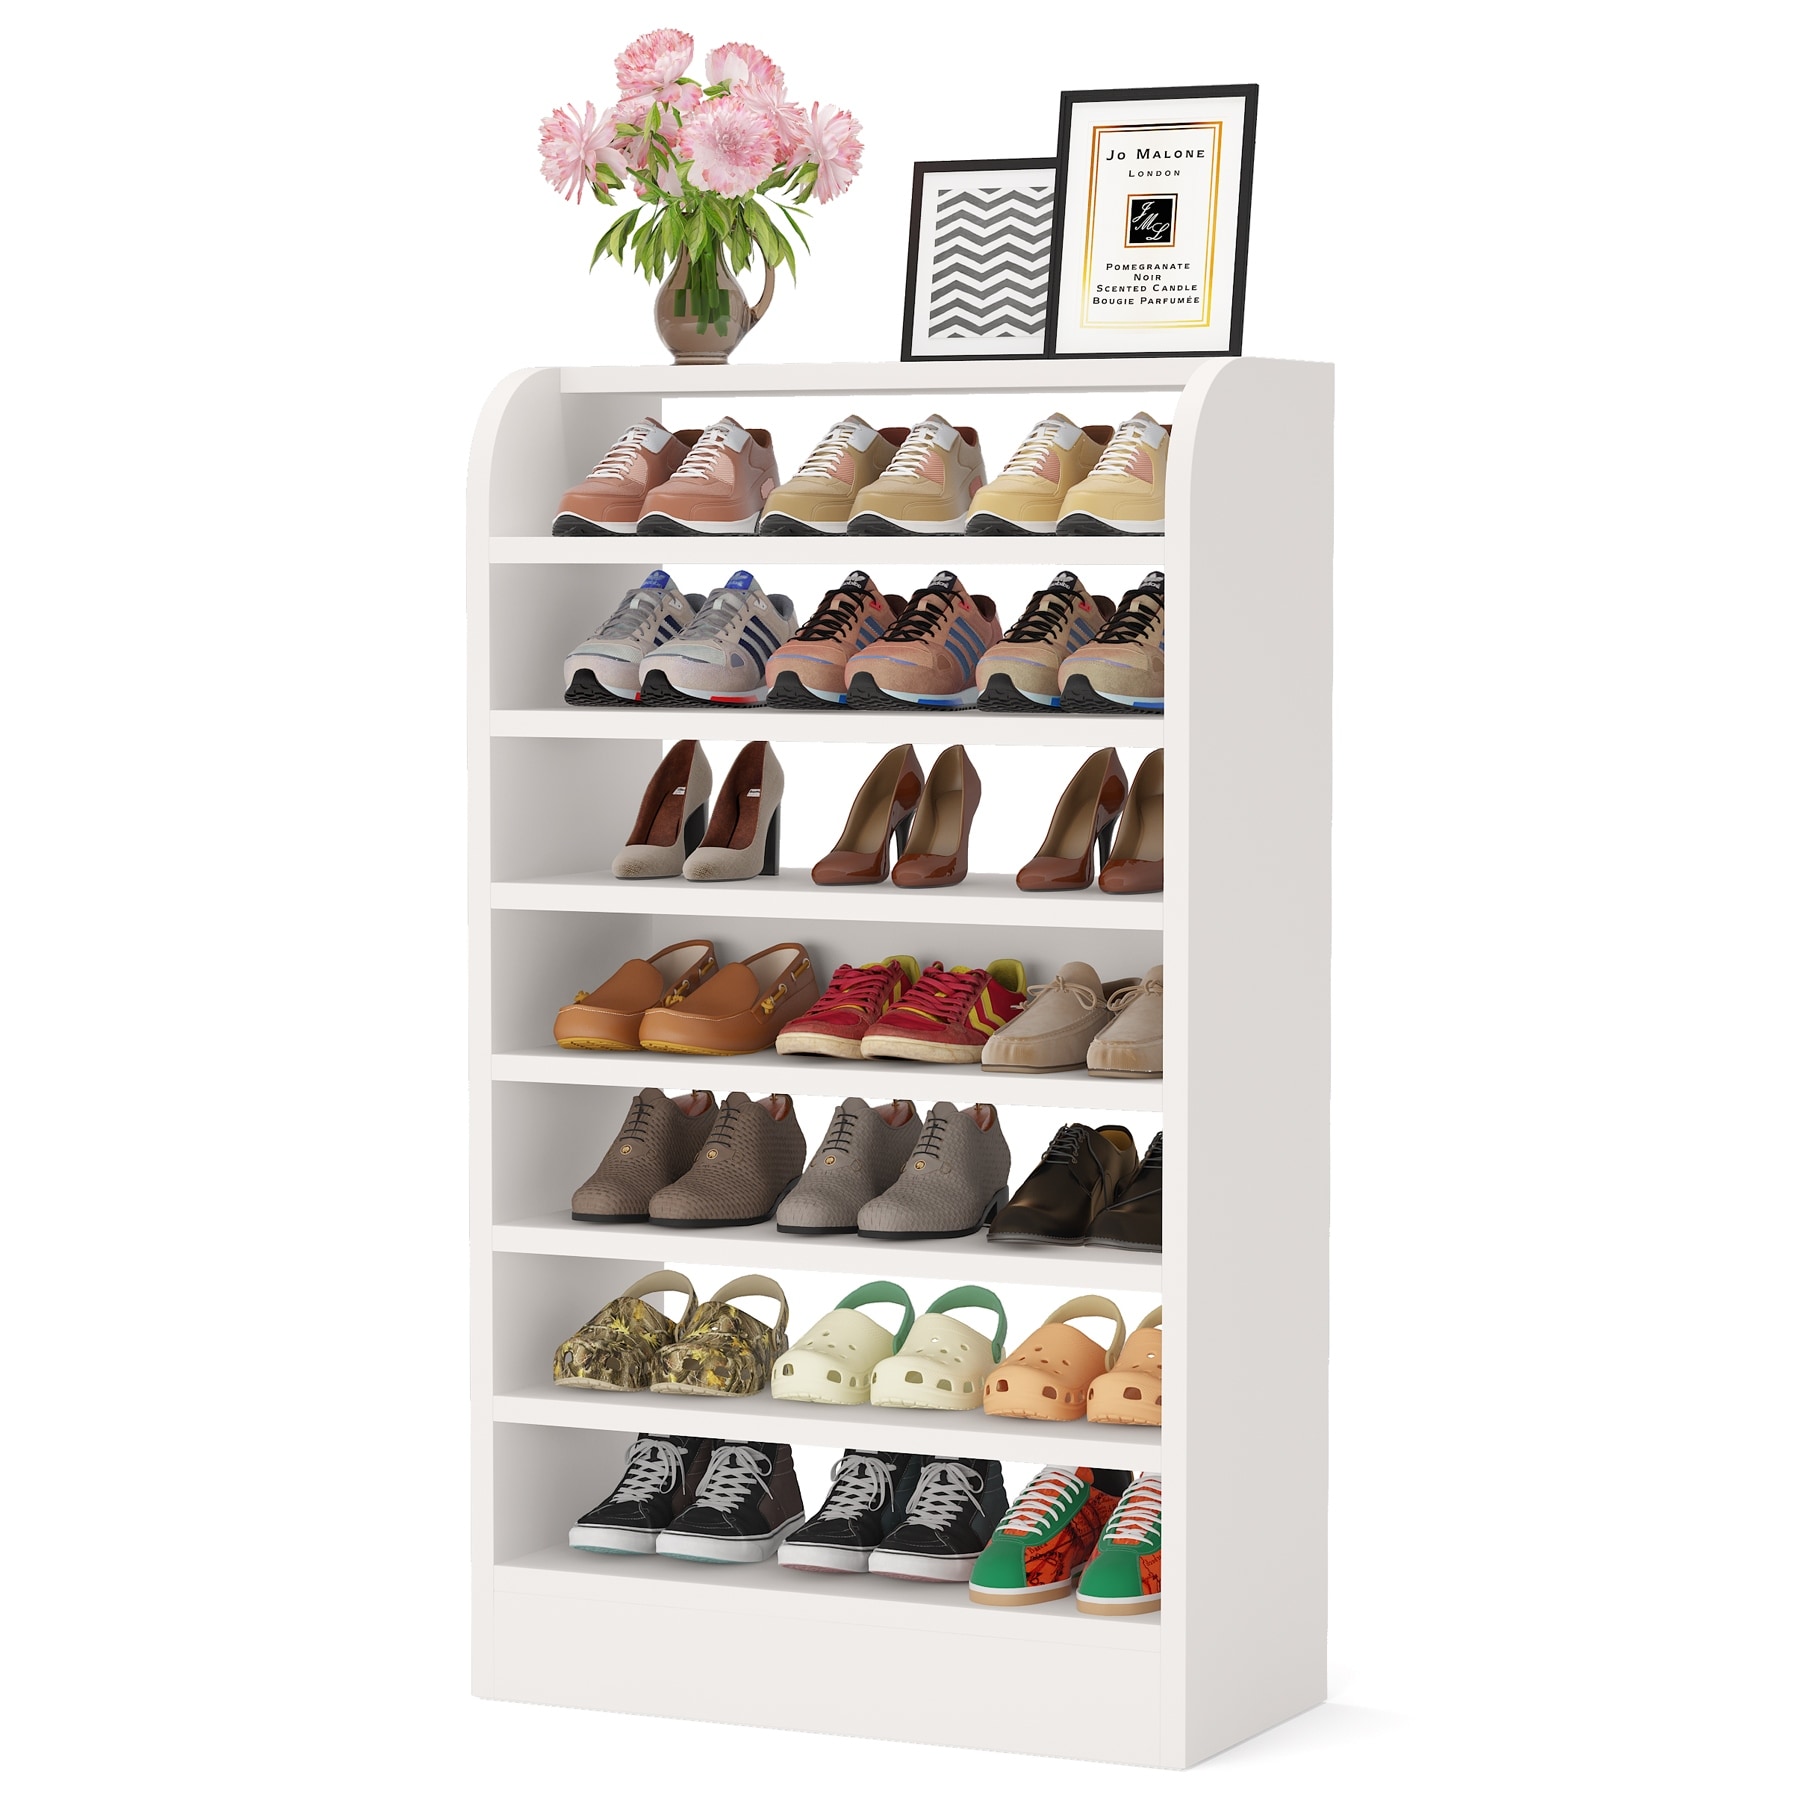 https://ak1.ostkcdn.com/images/products/is/images/direct/09df4b486062cf8a62c08bccb85da612239f9a73/Shoe-Cabinet-for-Entryway%2C-8-Tier-Tall-Shoe-Shelf-Shoes-Rack-Organizer%2C-Wooden-Shoe-Storage-Cabinet-for-Hallway%2C-Closet.jpg